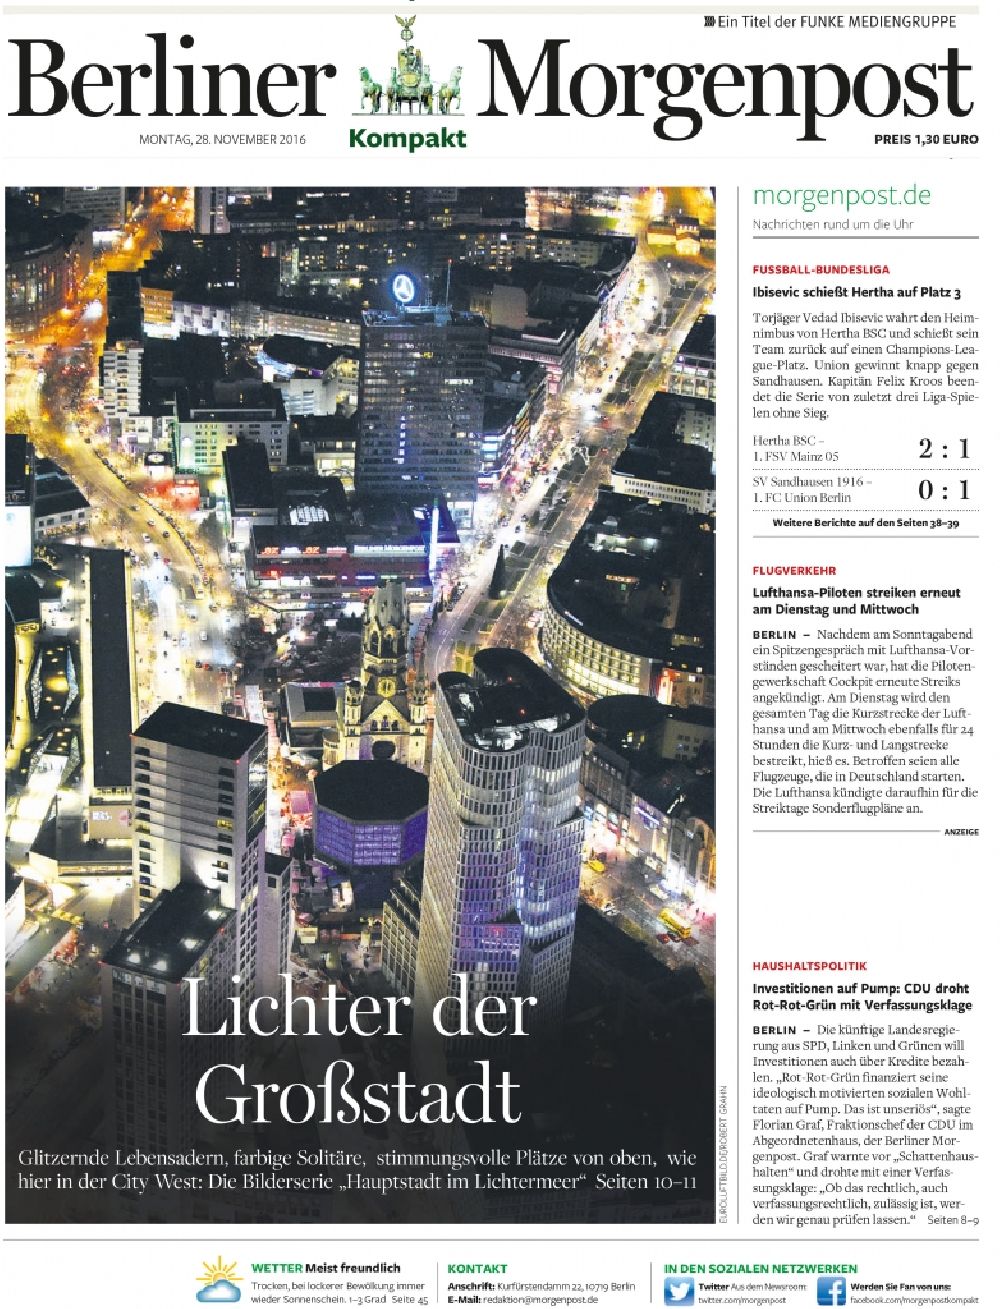 Berlin at night from the bird perspective: Coverage - Media use of the aerial image use in BERLINER MORGENPOST Cover image of the title page with night-air image of the skyline at Breitscheidplatz in Berlin